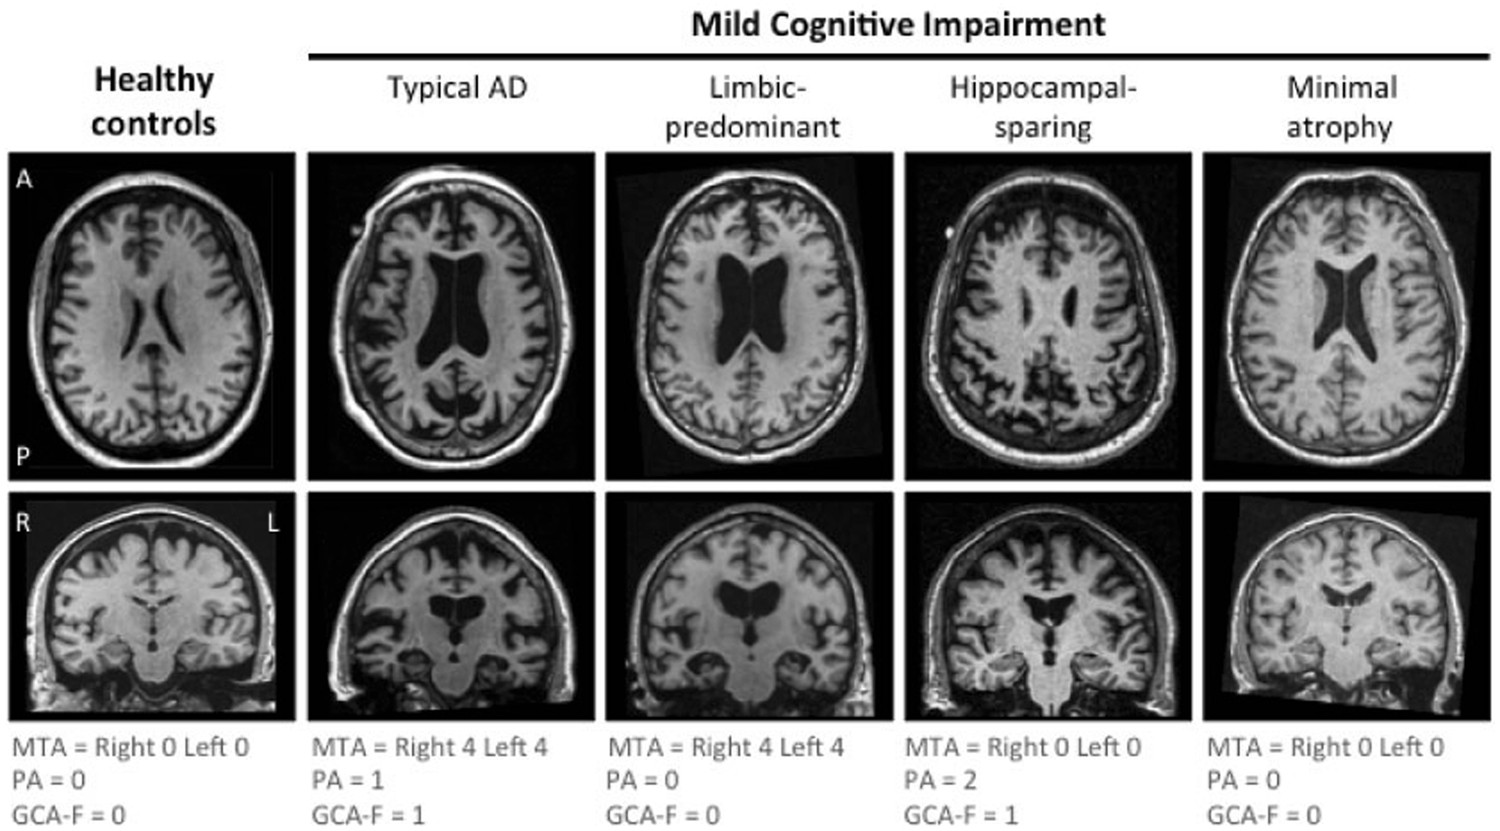 The A/T/N biomarker scheme and patterns of brain atrophy assessed in mild  cognitive impairment | Scientific Reports